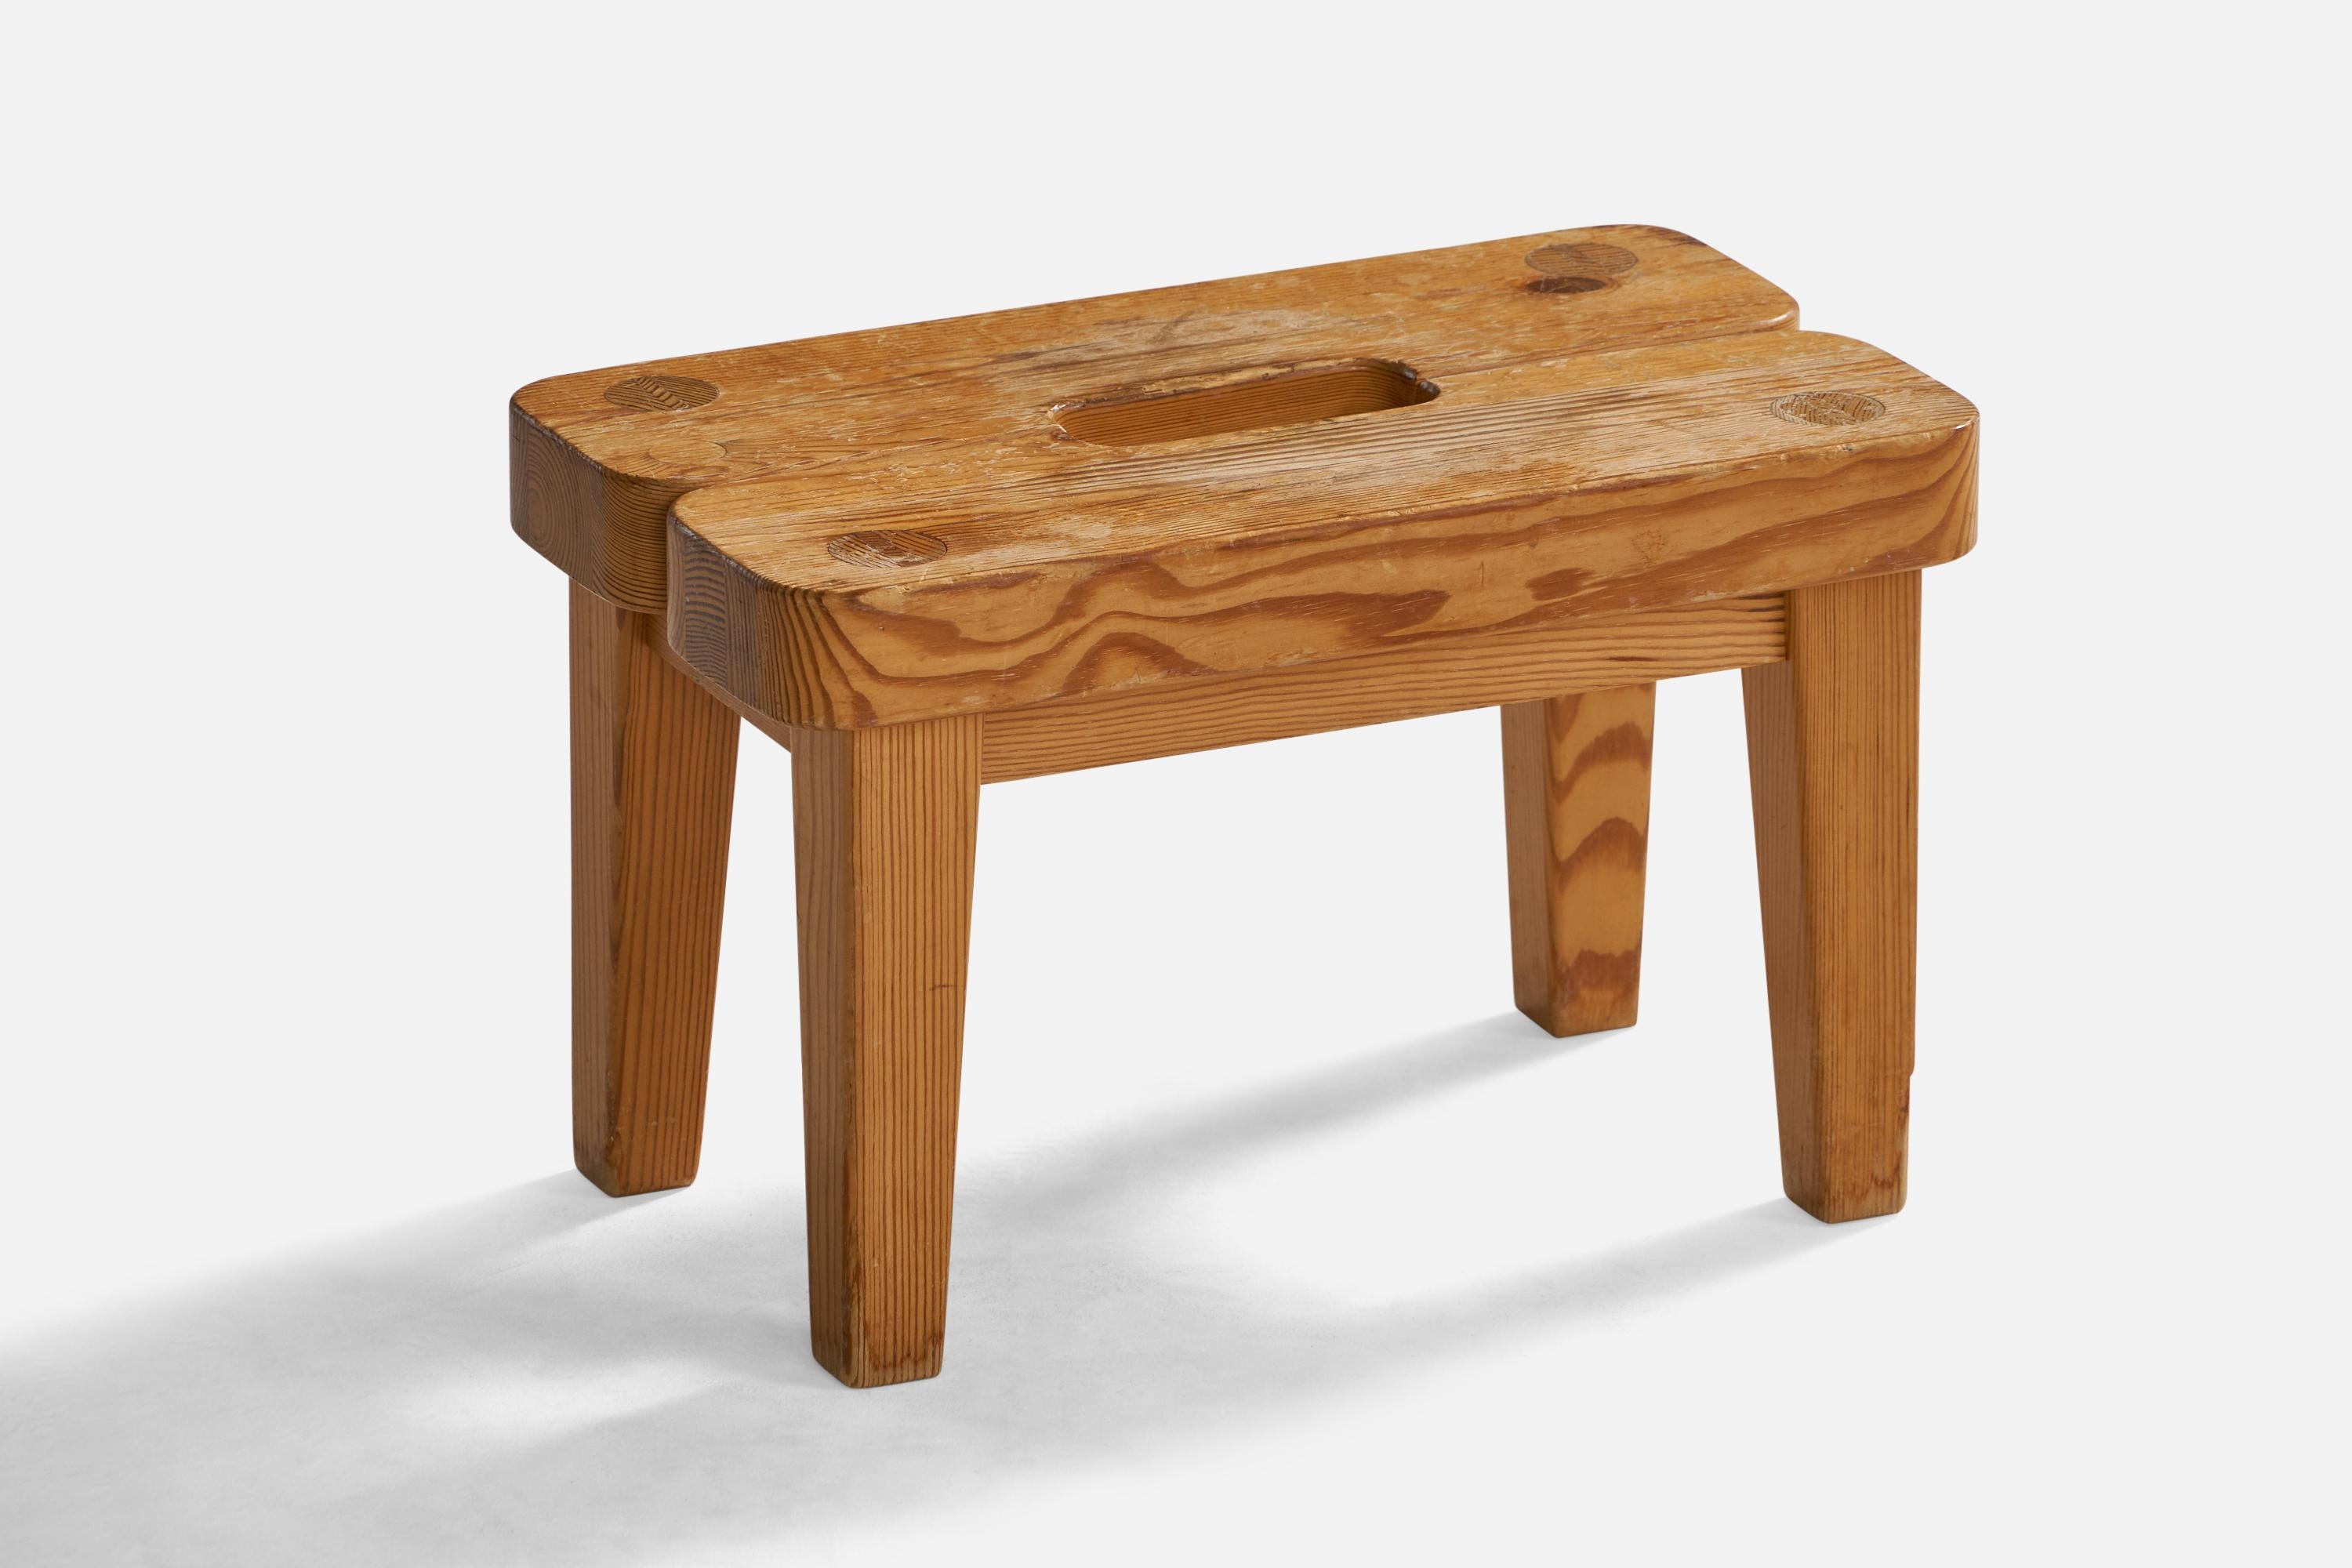 A small pine stool designed and produced in Sweden, c. 1960s.

Seat height: 8.65”